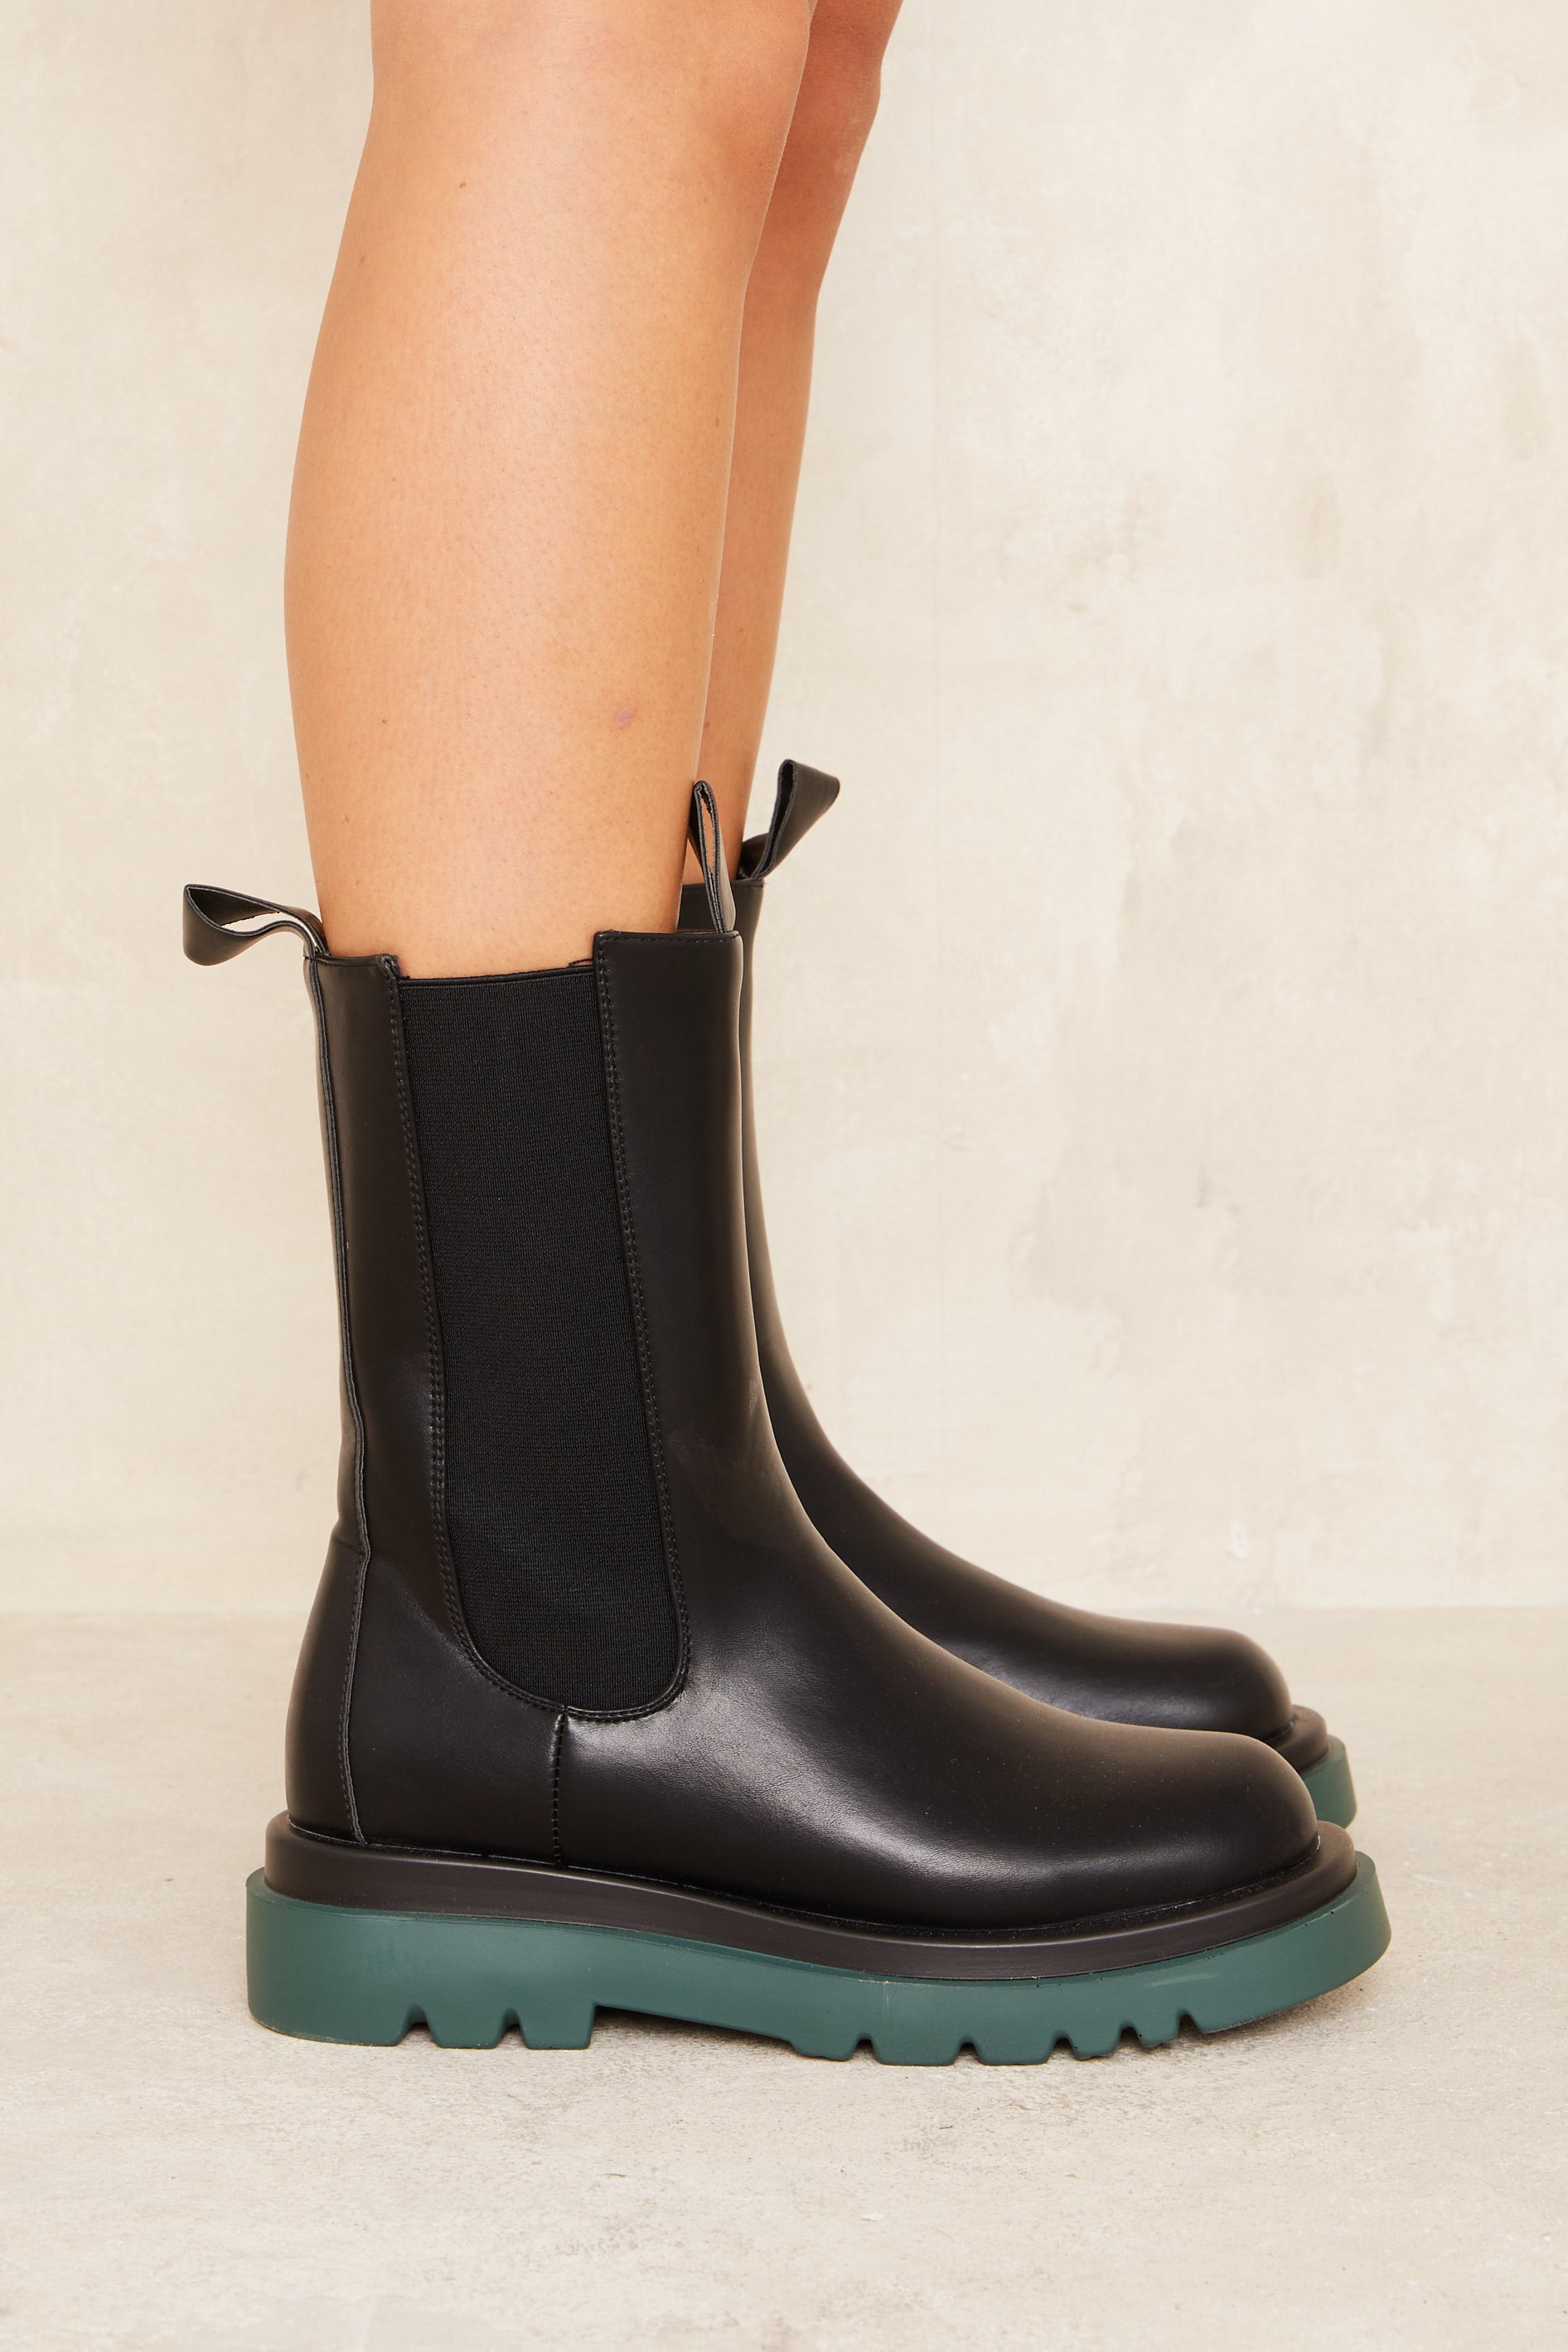 LEXIA Chunky Green Leather Boots